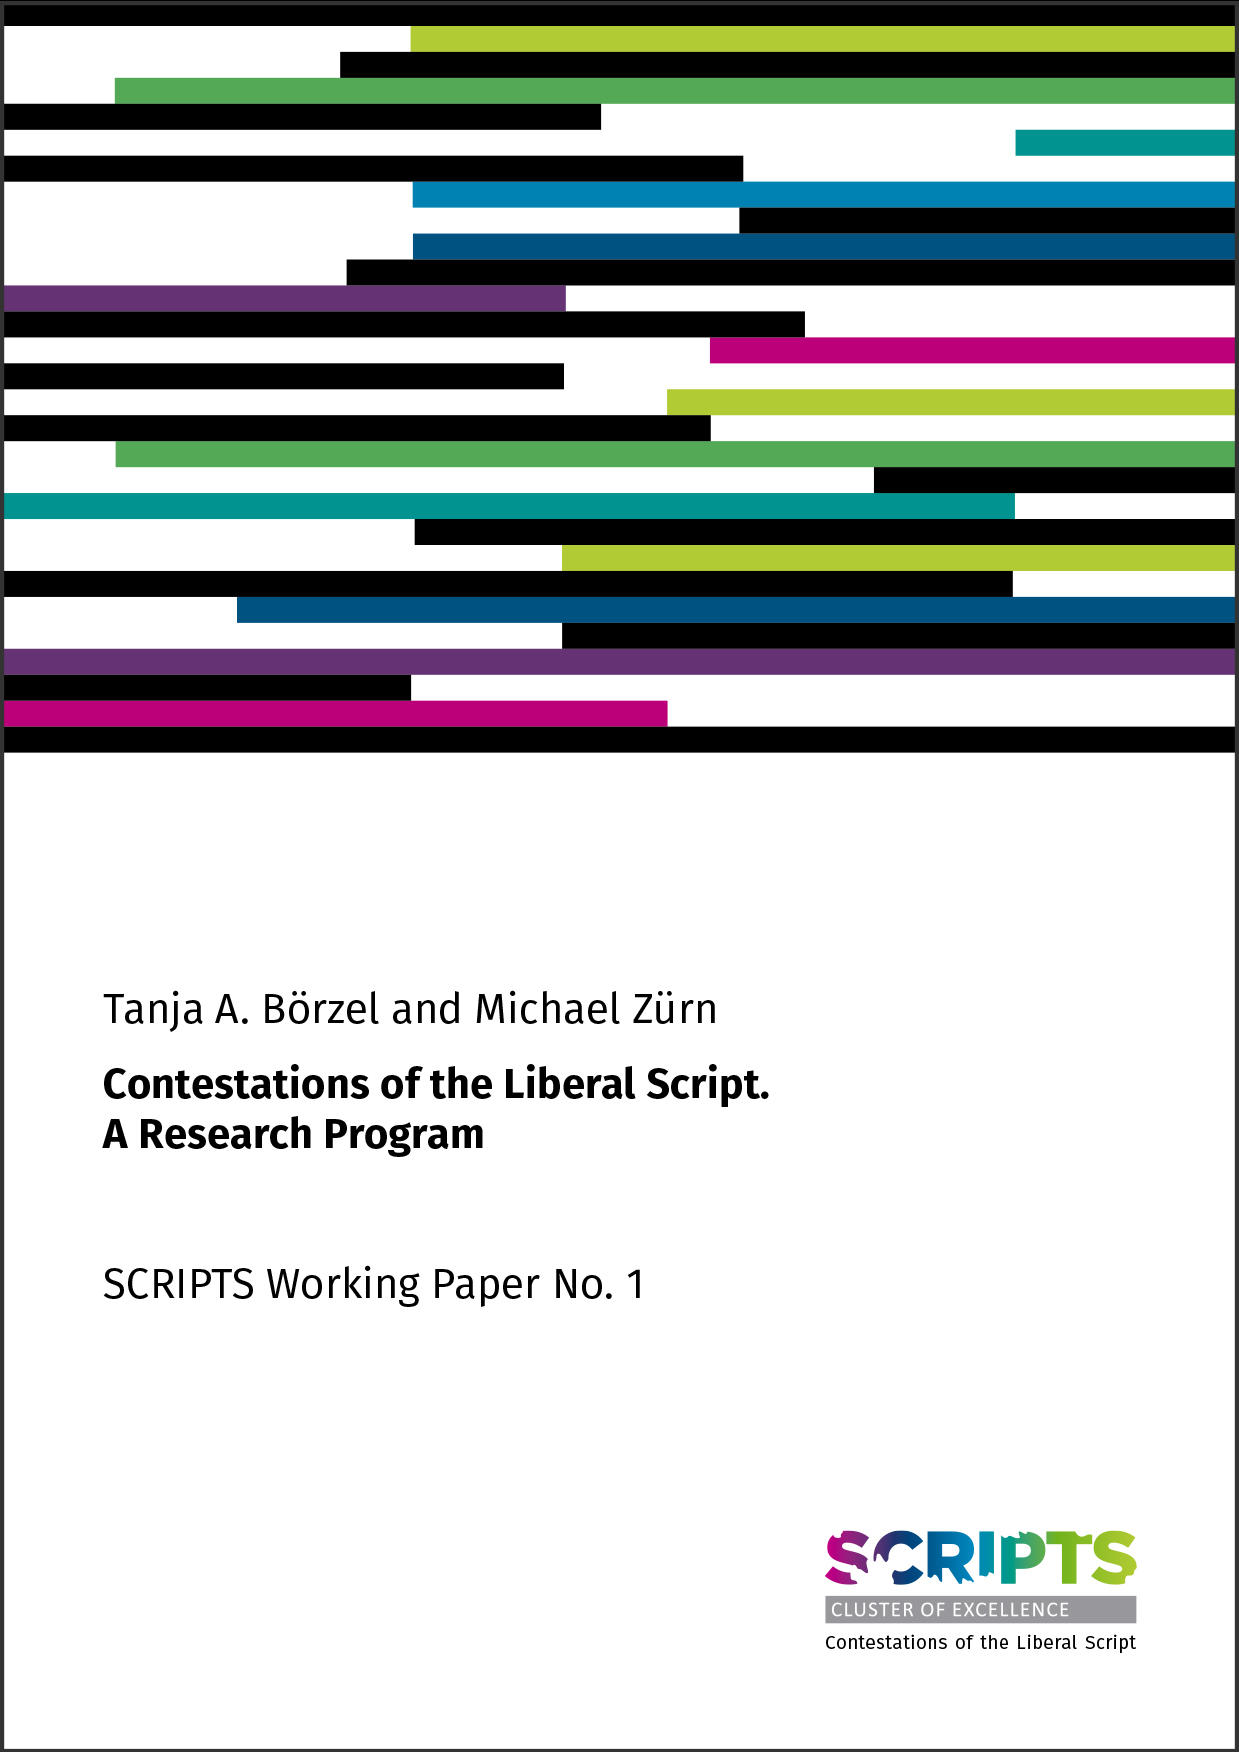 SCRIPTS_Working_Paper_1_Cover